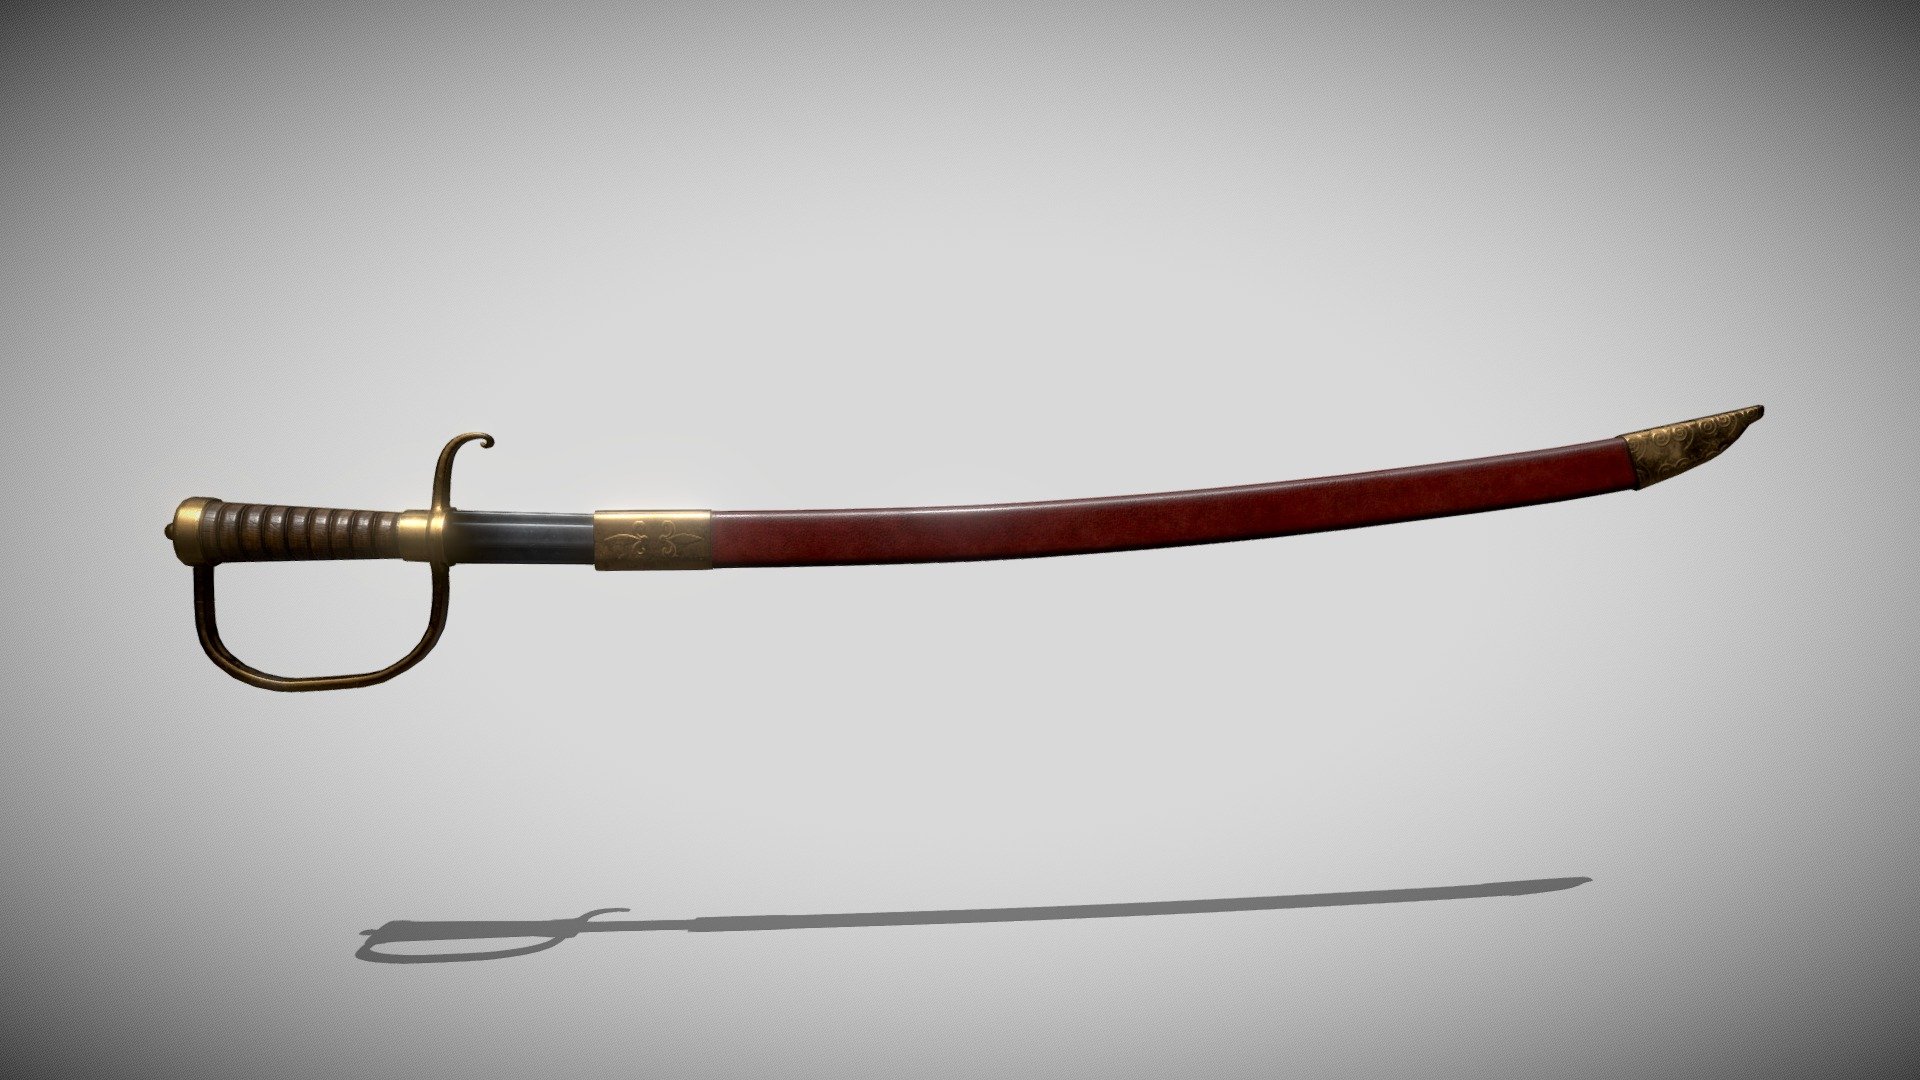 The sword was introduced by General Order in 1796, replacing the previous 1786 Pattern. It was similar to its predecessor in having a spadroon blade, i.e. one straight, flat backed and single edged with a single fuller on each side. The hilt was of gilt brass or gunmetal, with a knucklebow, vestigial quillon and a twin-shell guard somewhat similar in appearance to that of the smallswords which had been common civilian wear until shortly before this period. The pommel was urn shaped and, in many later examples, the inner guard was hinged to allow the sword to sit against the body more comfortably and reduce wear to the officer's uniform. Blades were commonly quite extensively decorated, often blued and gilt 3d model